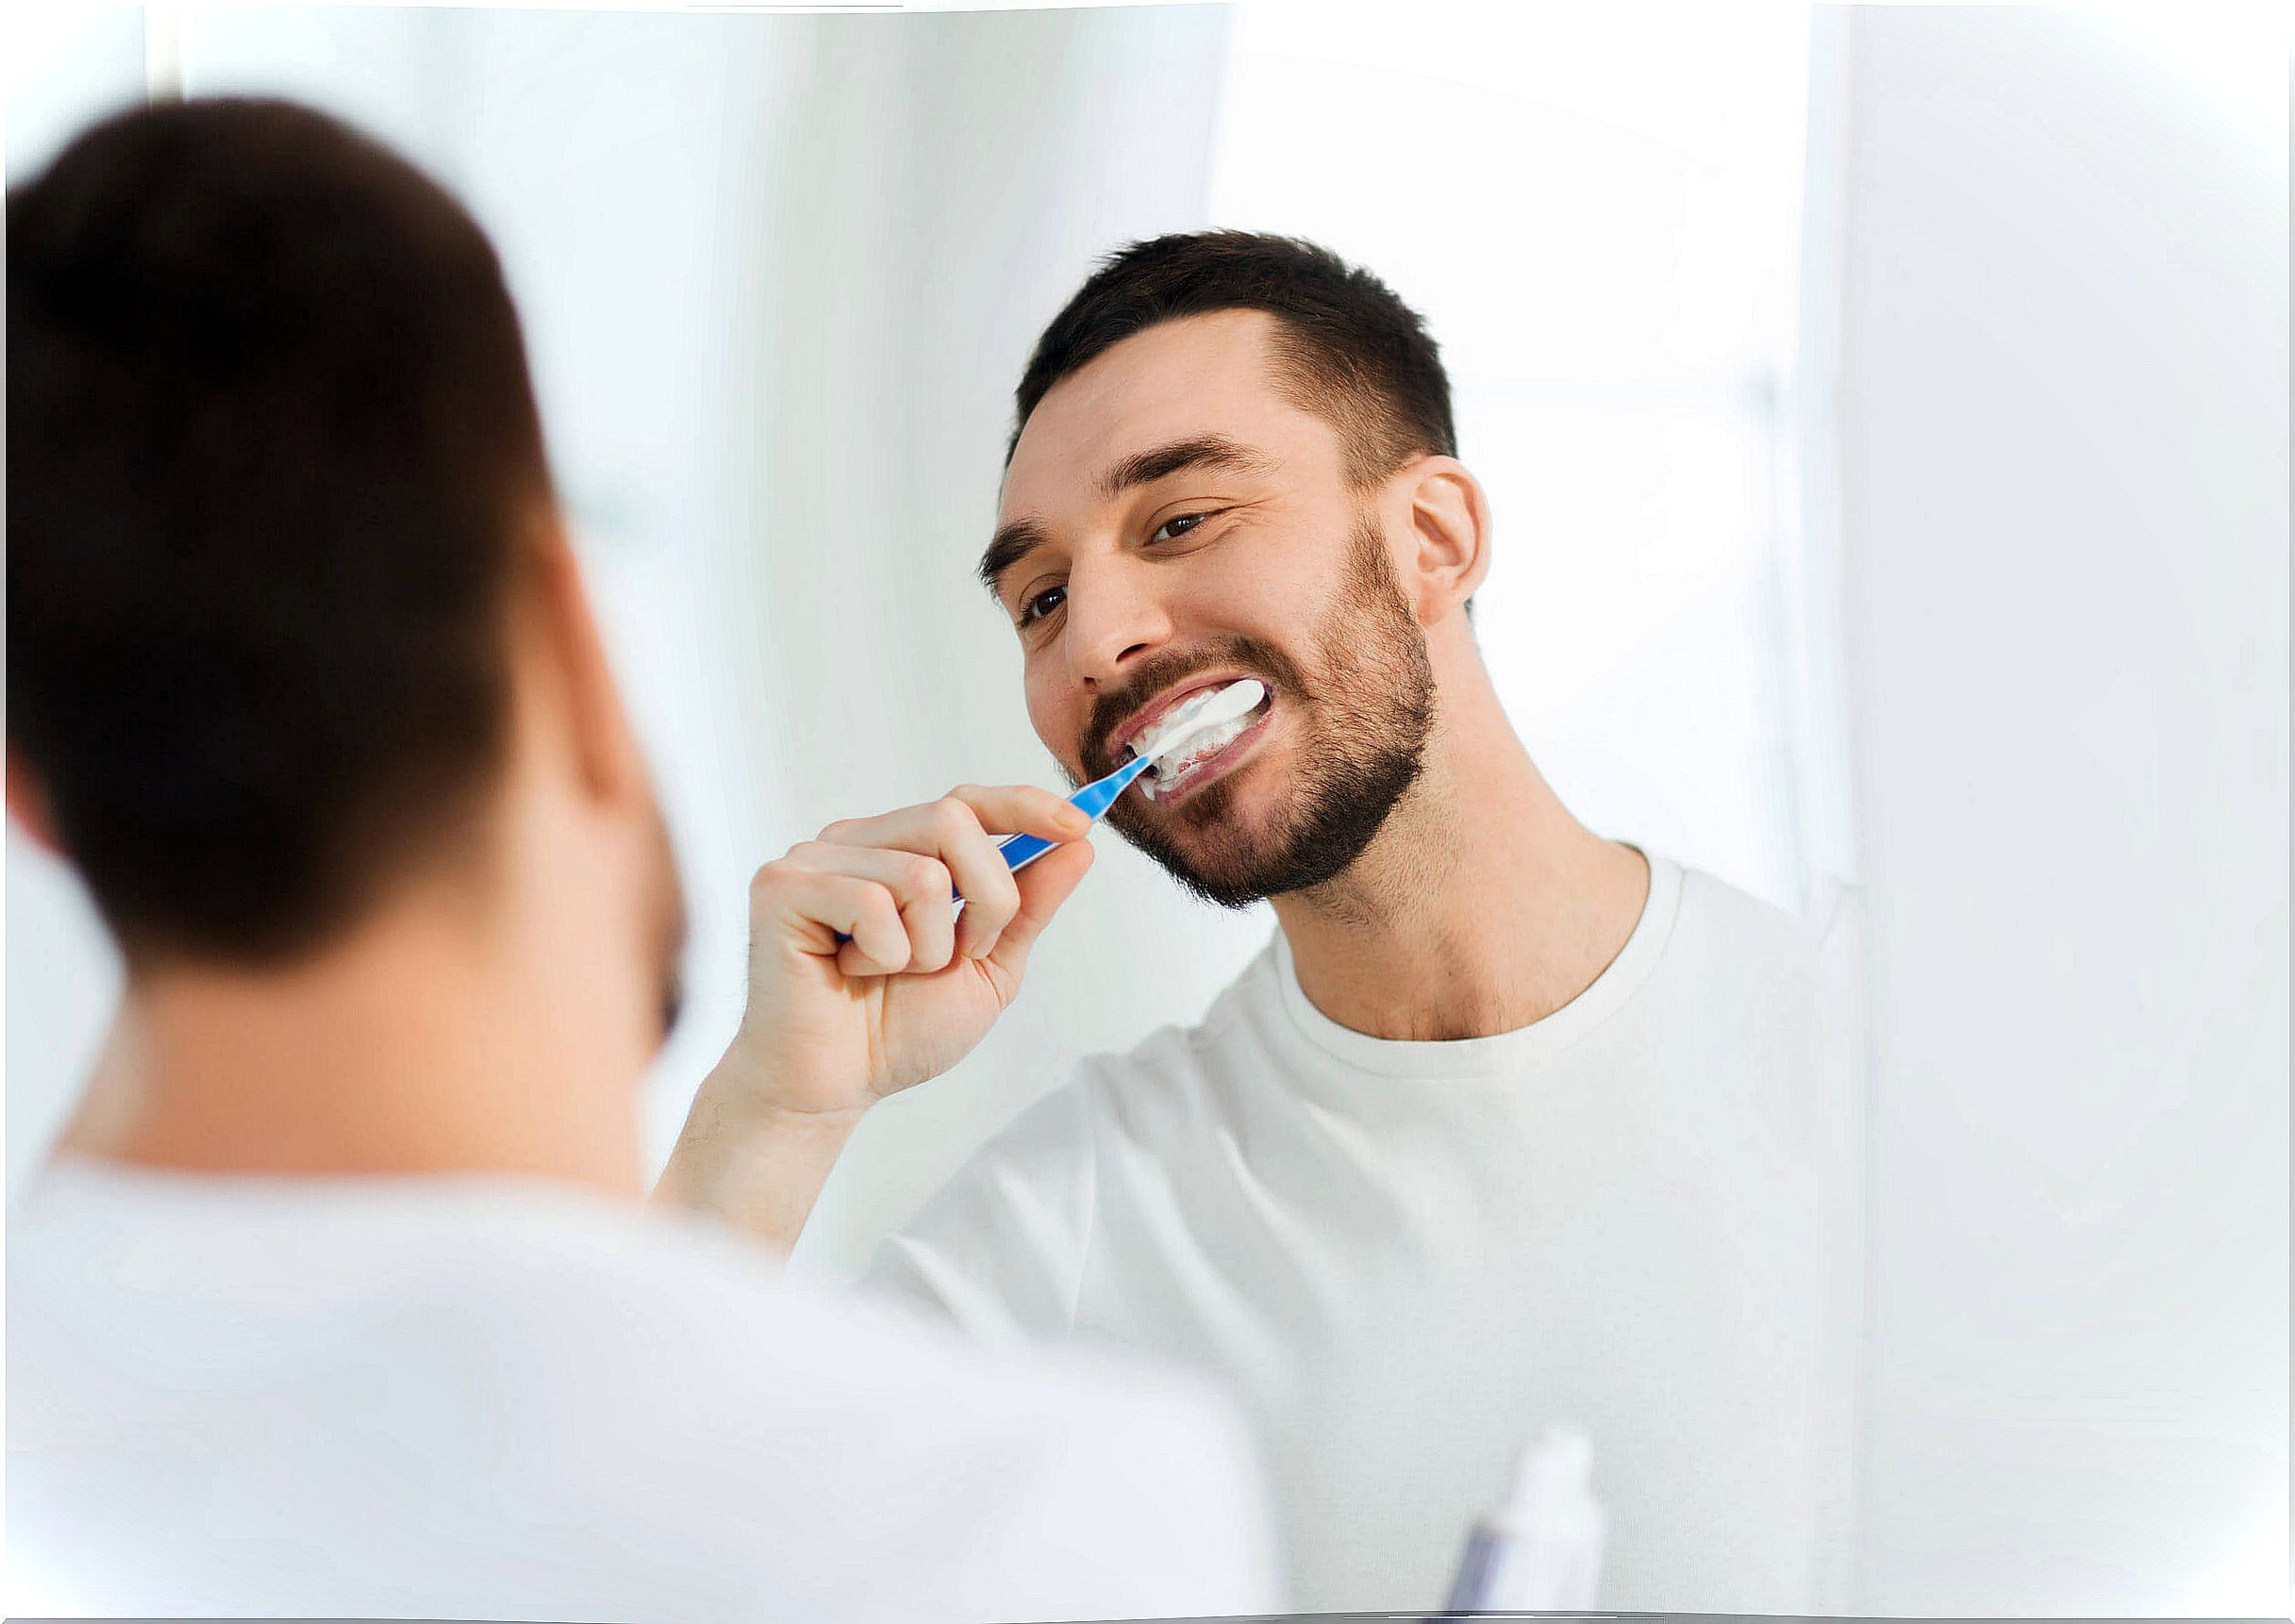 To prevent mouth sores, you need to have good oral hygiene.